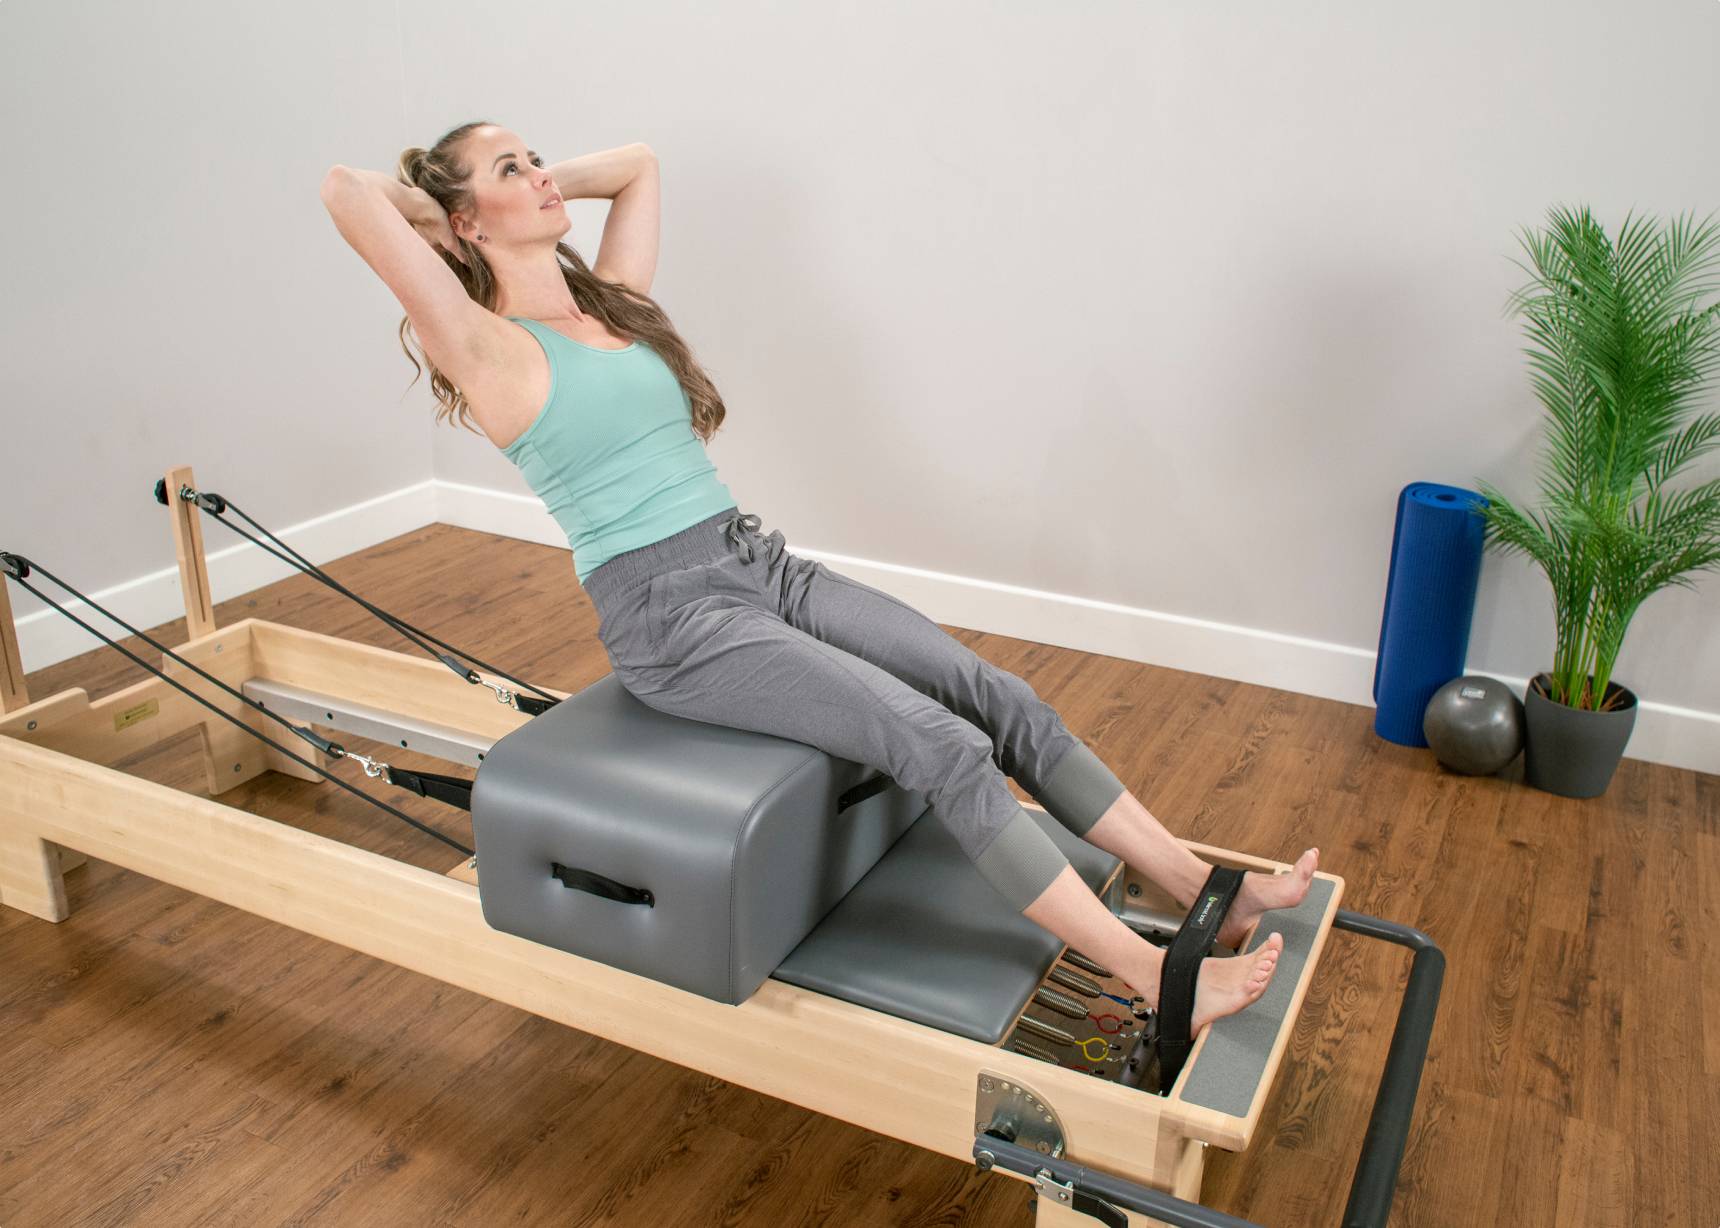 Close-up of the Contour Sitting Box being used by a woman during a Pilates session.